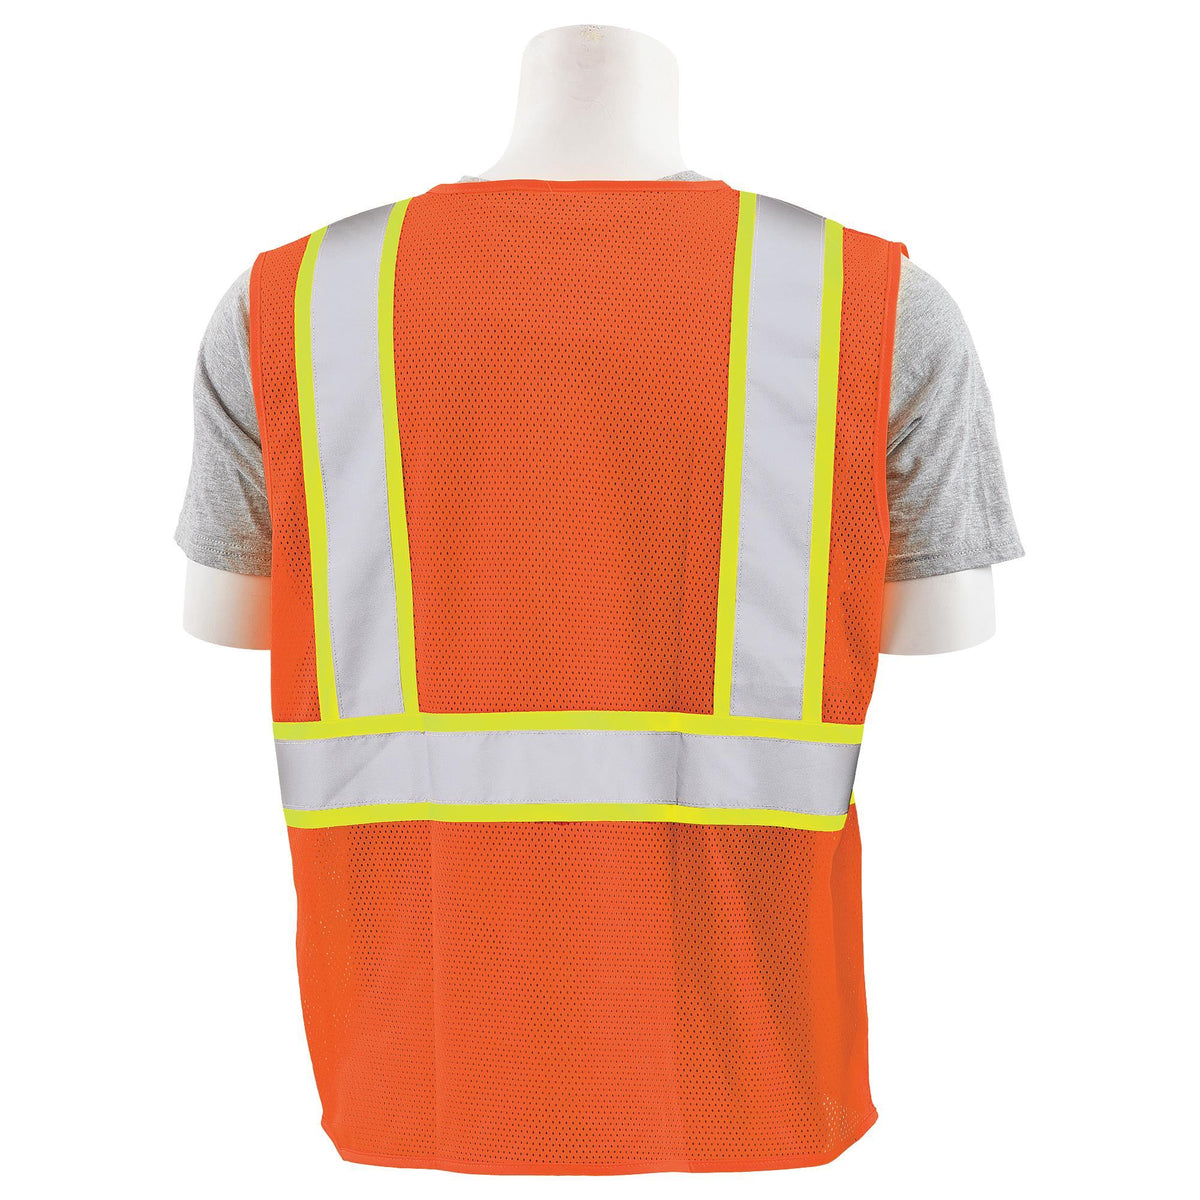 S195C Class 2 Flame Retardant Treated Safety Vest 1PC